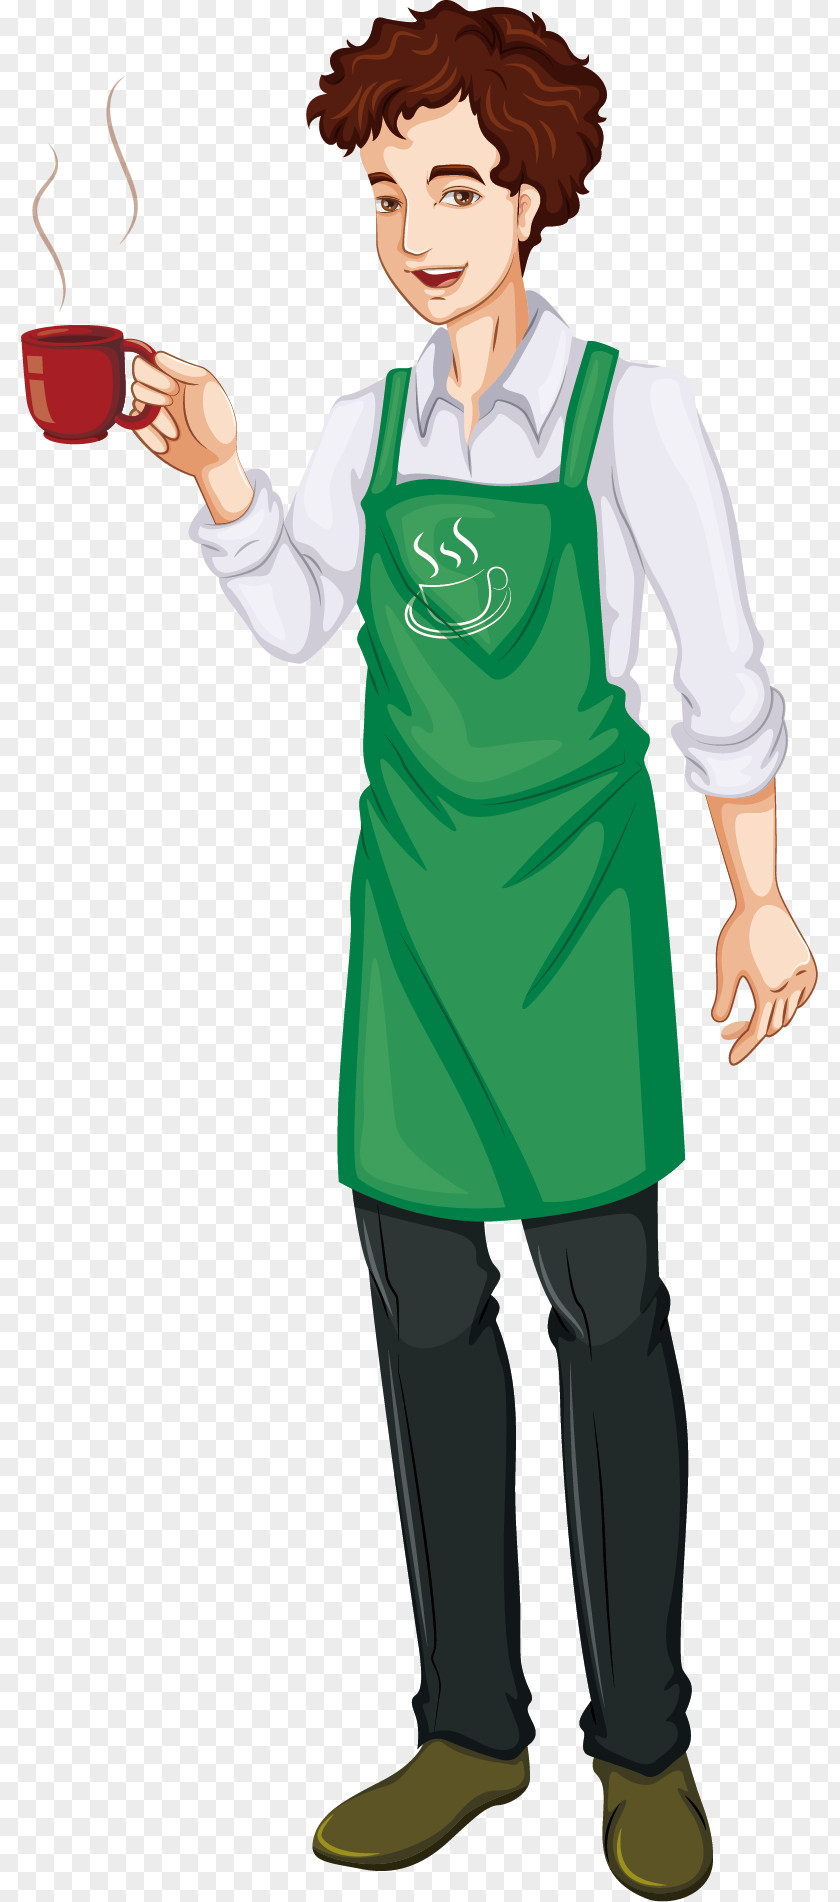 The Man Who Pours Coffee Cafe Drawing Waiter Illustration PNG